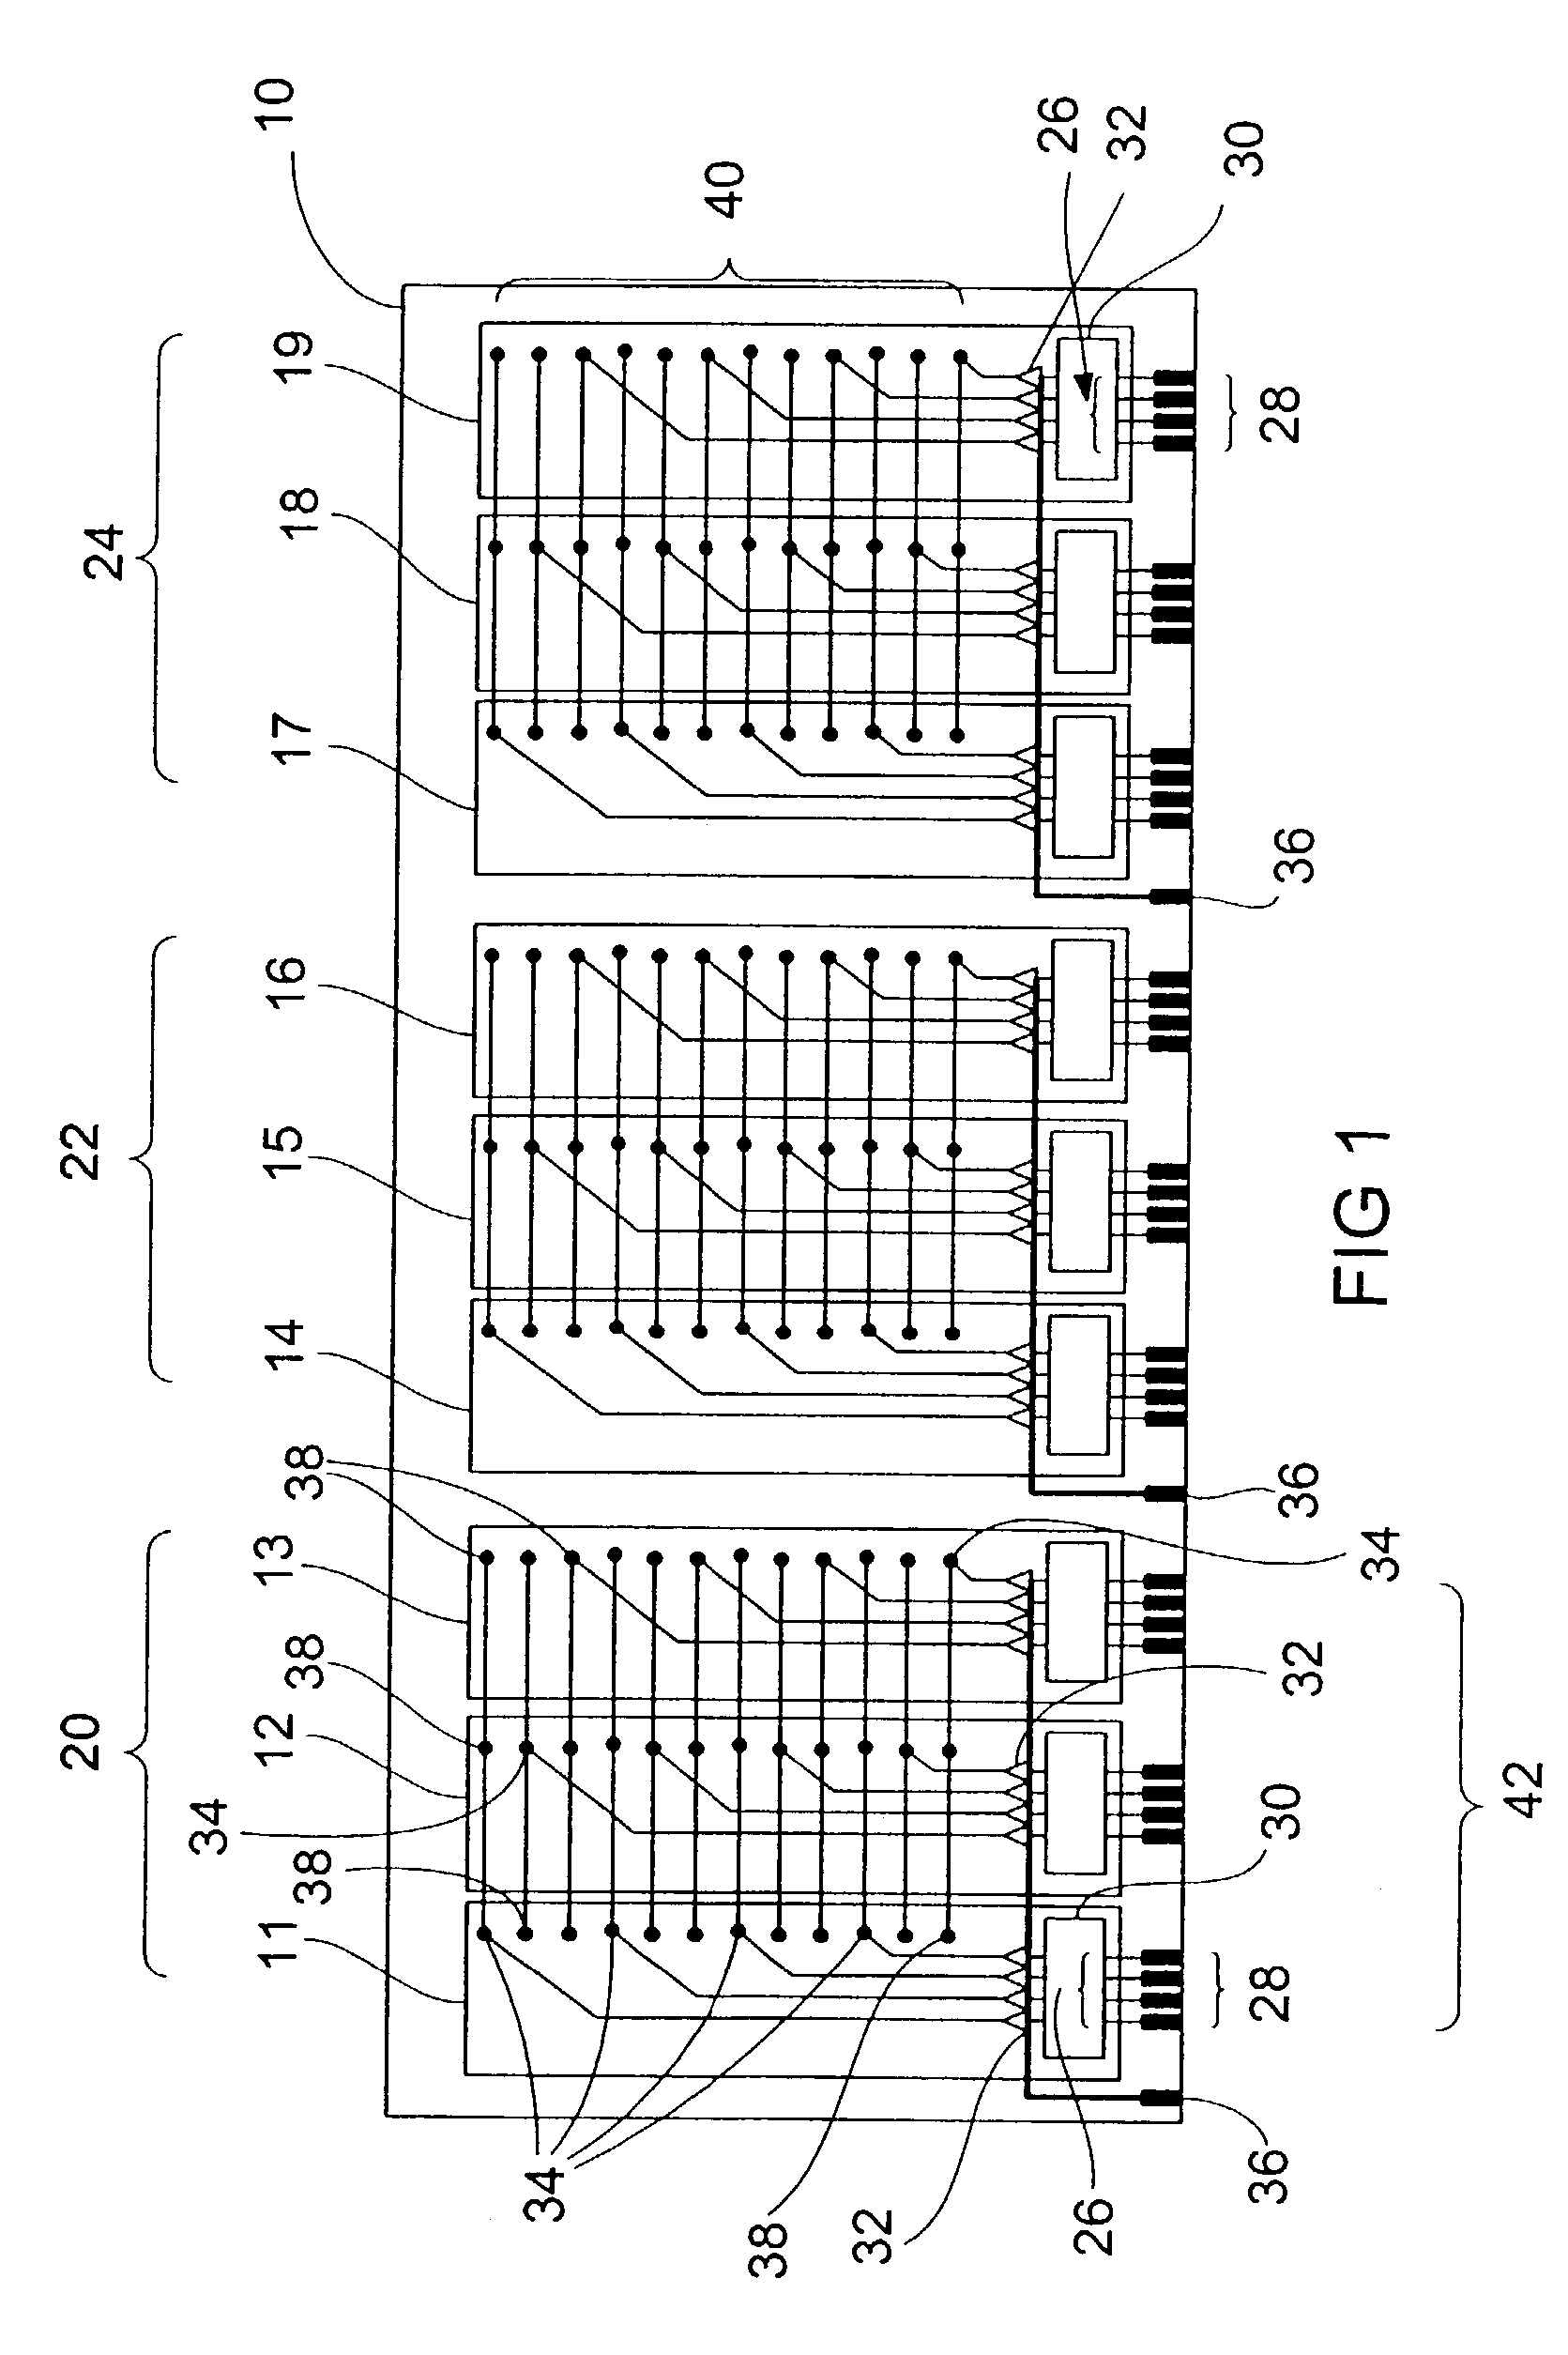 Device for supplying control signals to memory units, and a memory unit adapted thereto